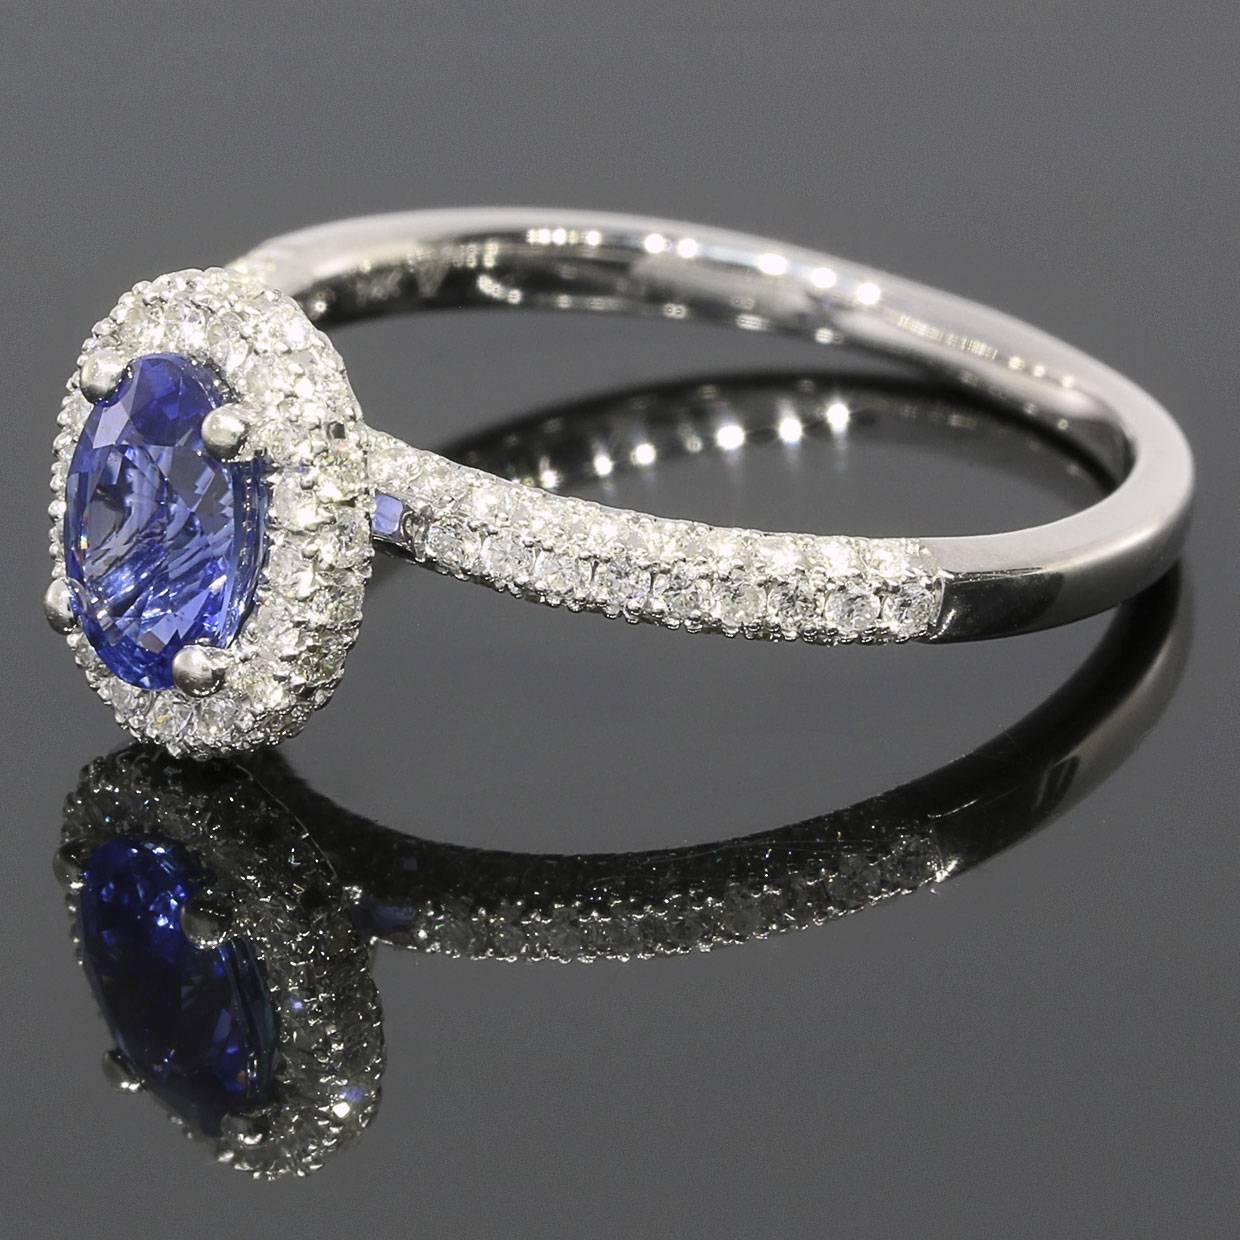 This lovely engagement ring has a beautiful diamond encrusted, halo design that gives a really classic & sparkly look! The ring features an oval brilliant cut, lab created, blue sapphire center that weighs 1.20 carat & is GGL certified. This